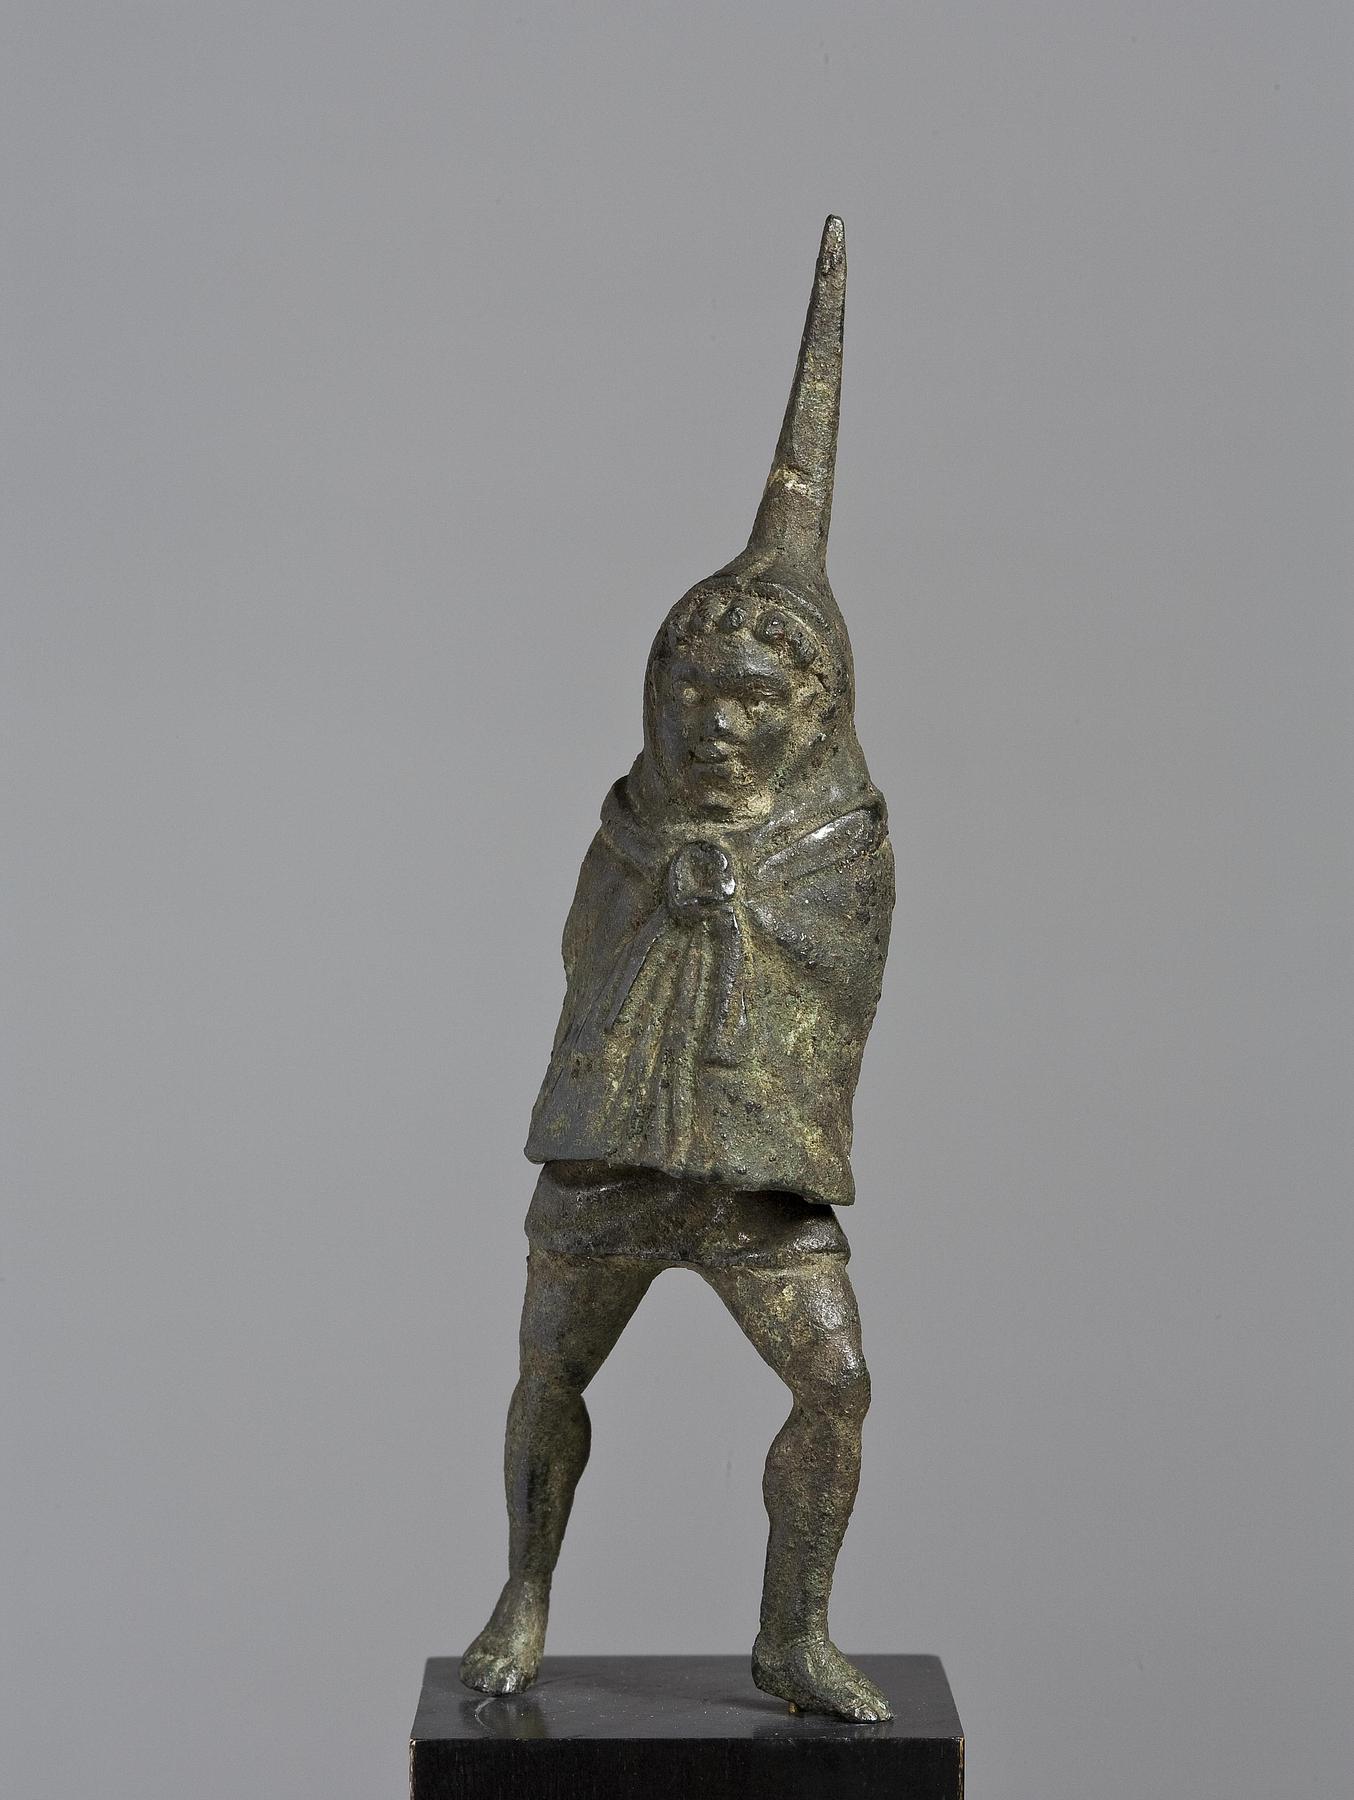 Statuette of an African boy with the top section concealing a giant phallus, H2050